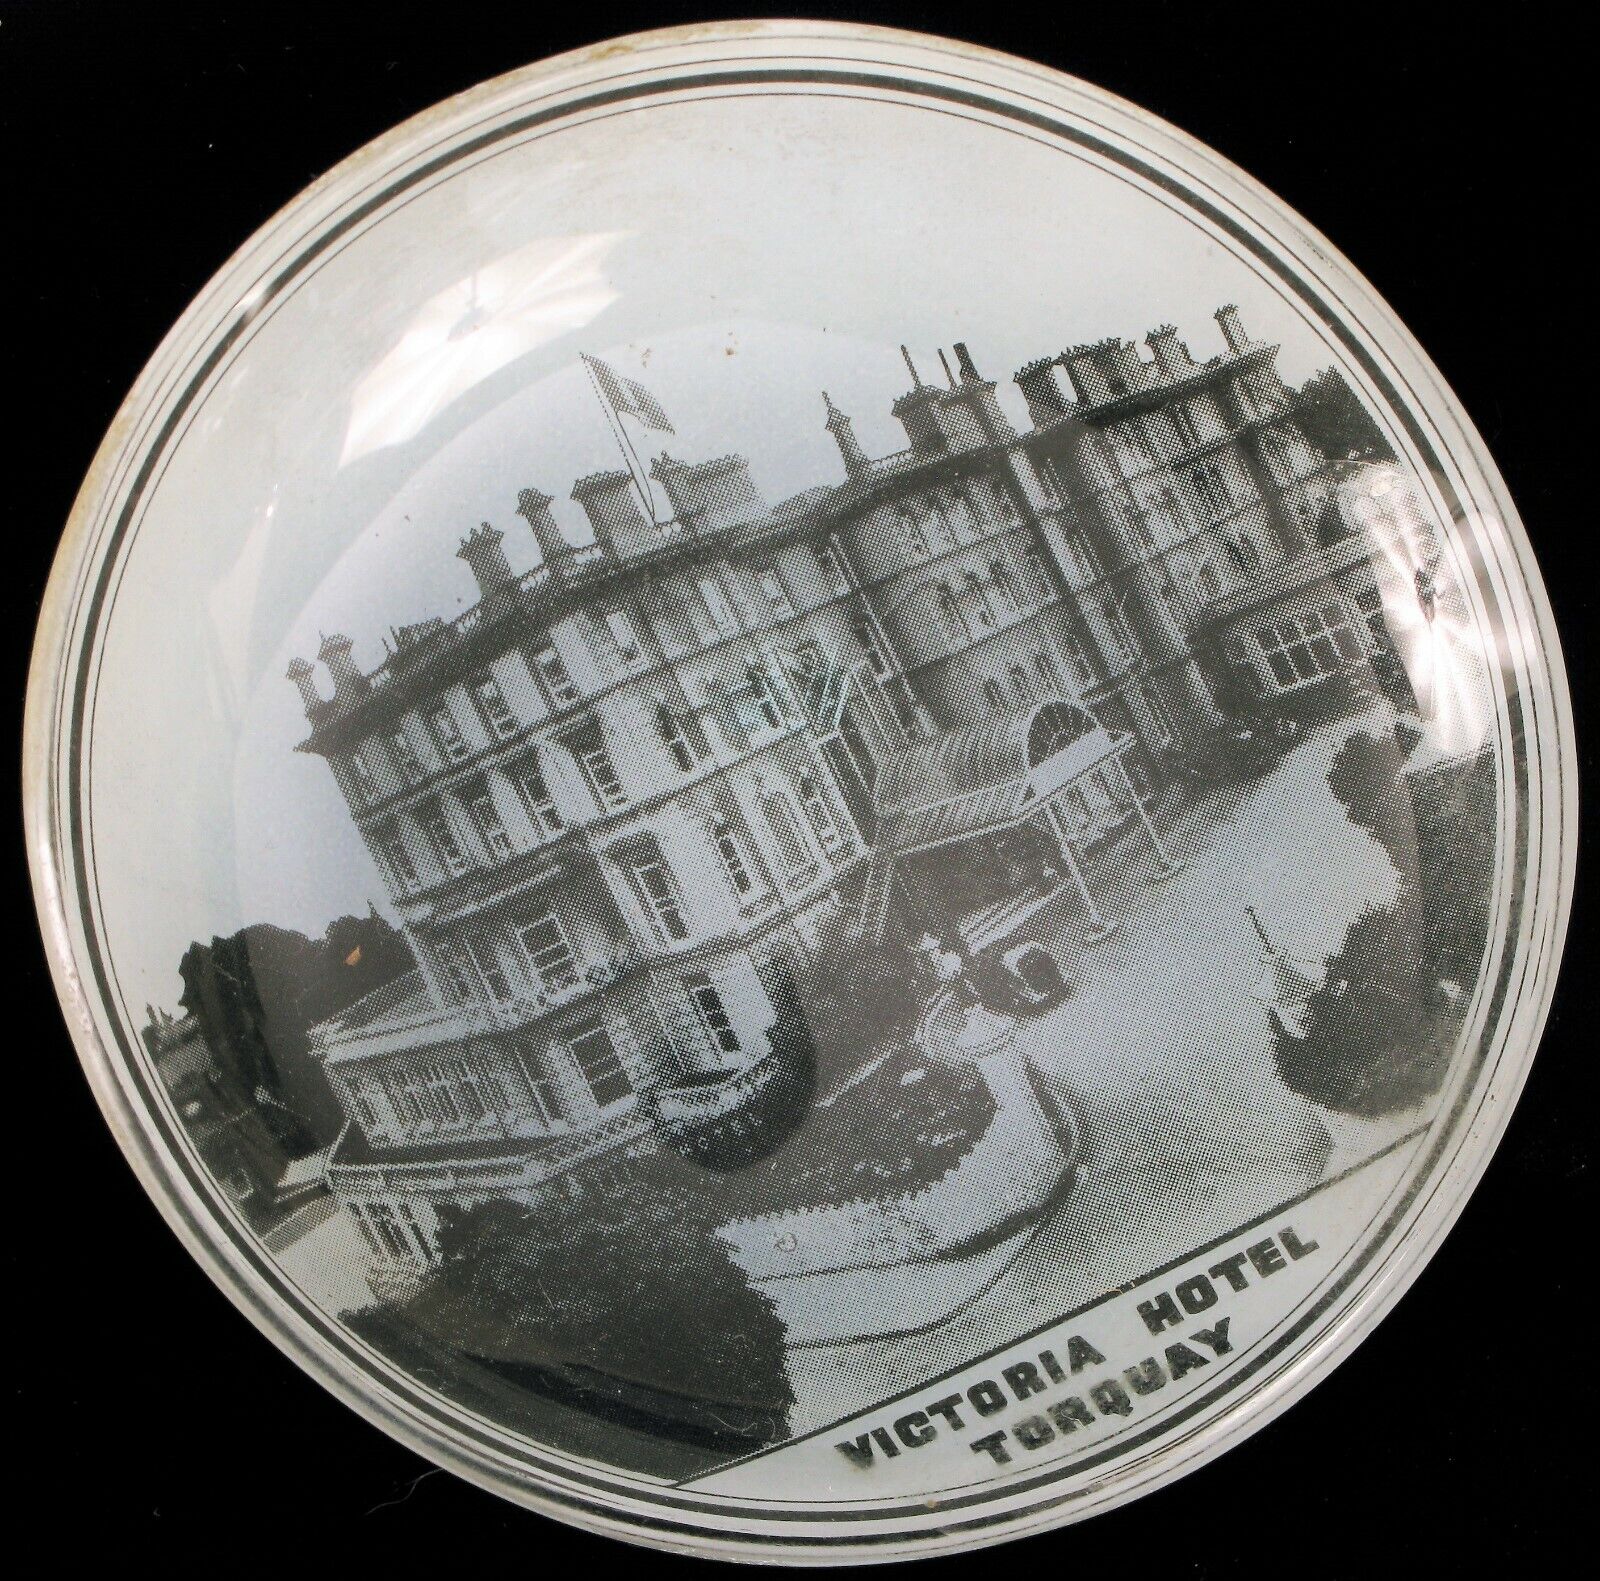 VINTAGE VICTORIA HOTEL TORQUAY UNITED KINGDOM PICTURE GLASS BOWL ADVERTISING 